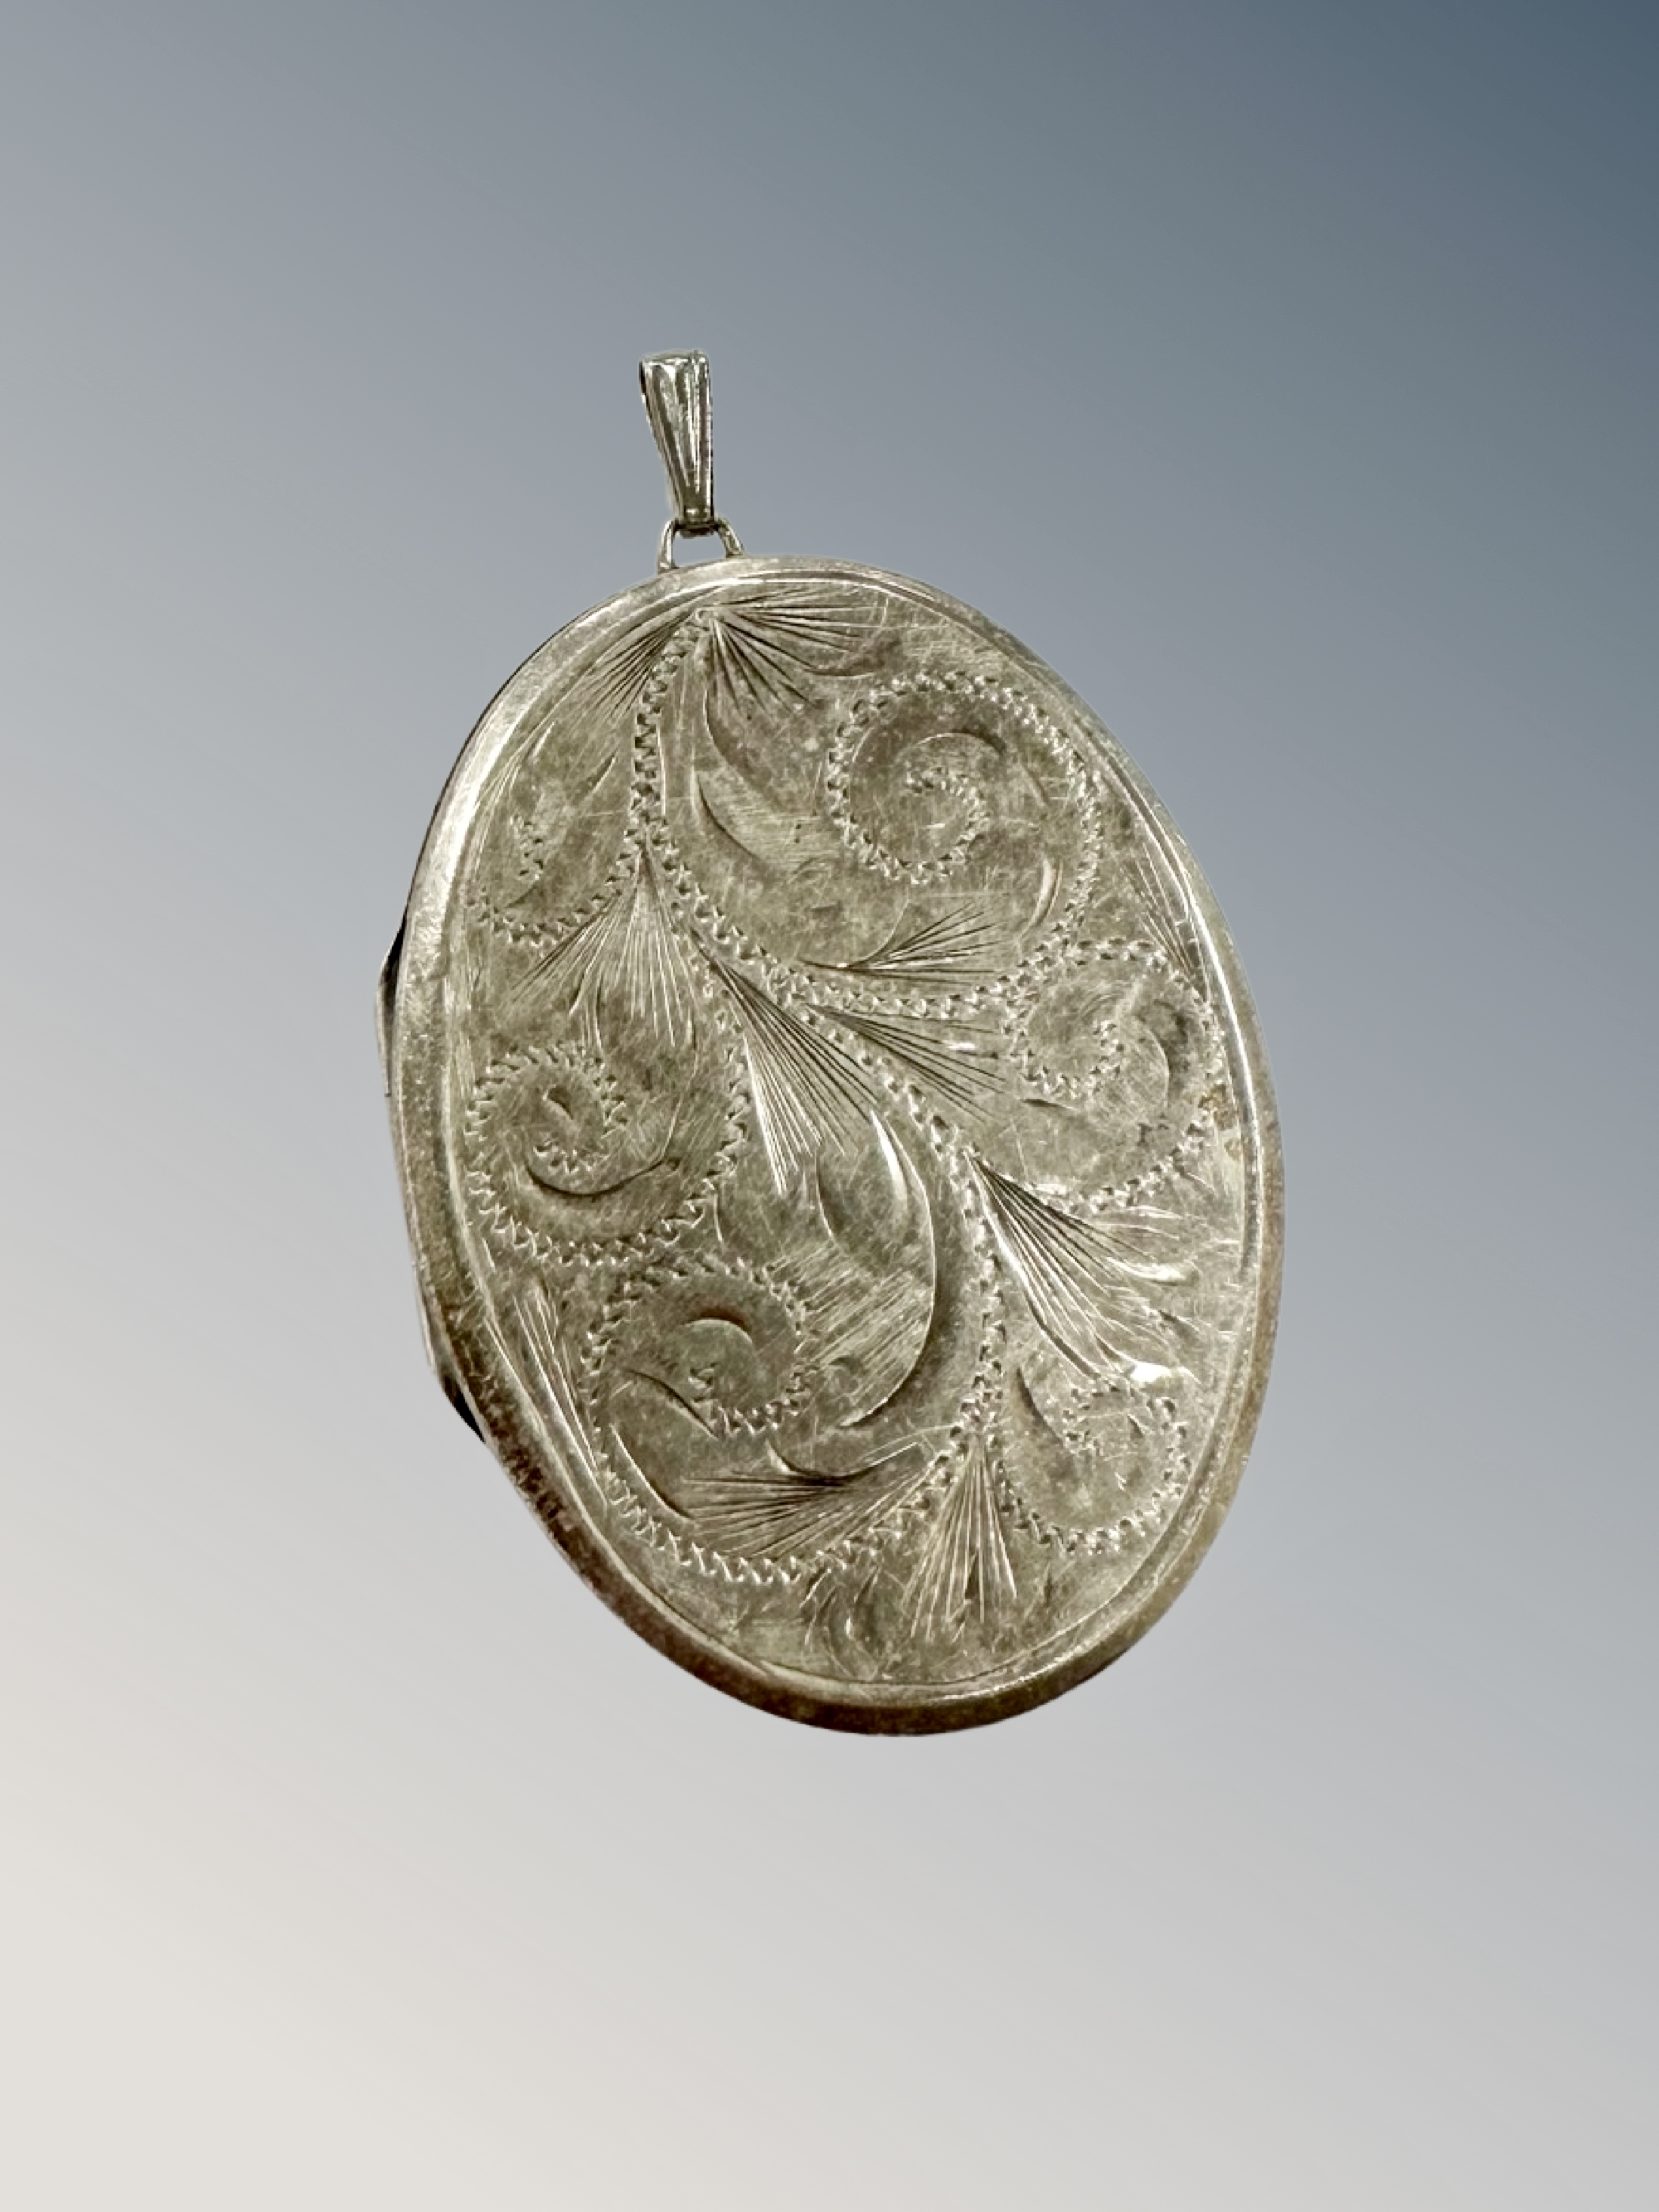 An engraved silver locket,